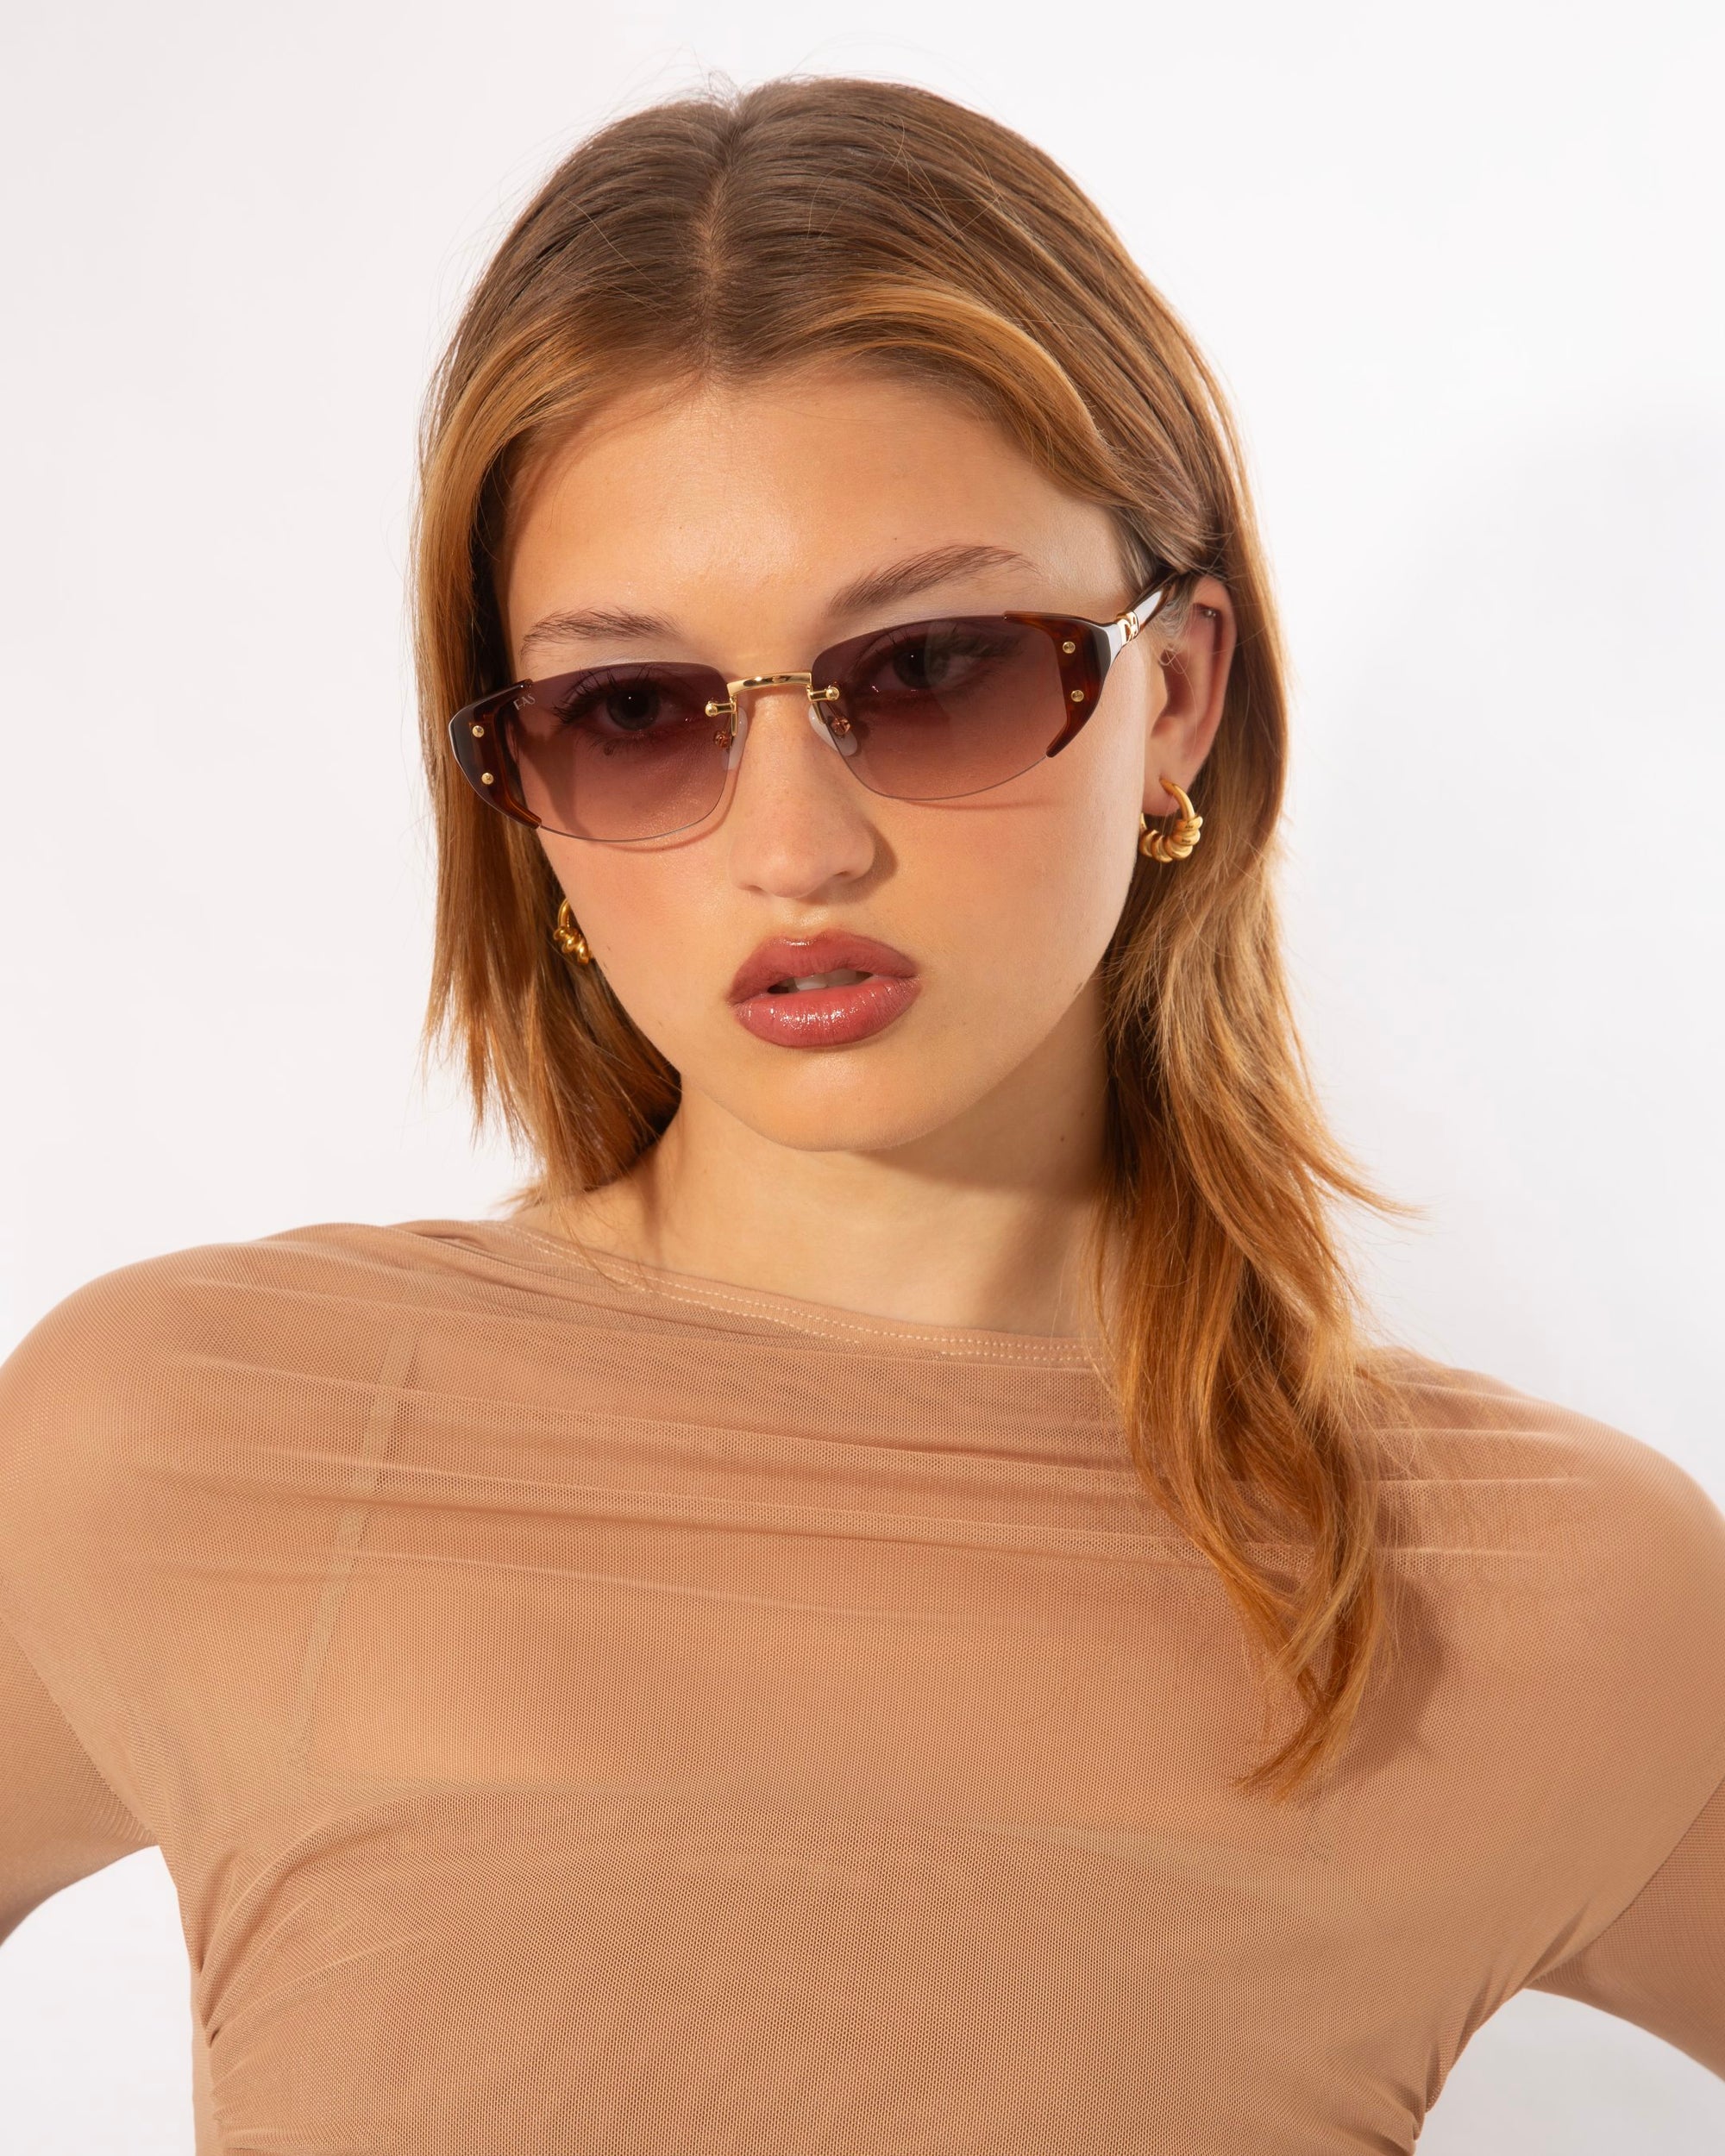 A person with long, light brown hair wearing stylish Harbour sunglasses and gold hoop earrings is pictured from the waist up. They are dressed in a sheer, beige top against a plain white background. The retro-inspired design of the For Art's Sake® Harbour sunglasses adds a modern twist to their look.